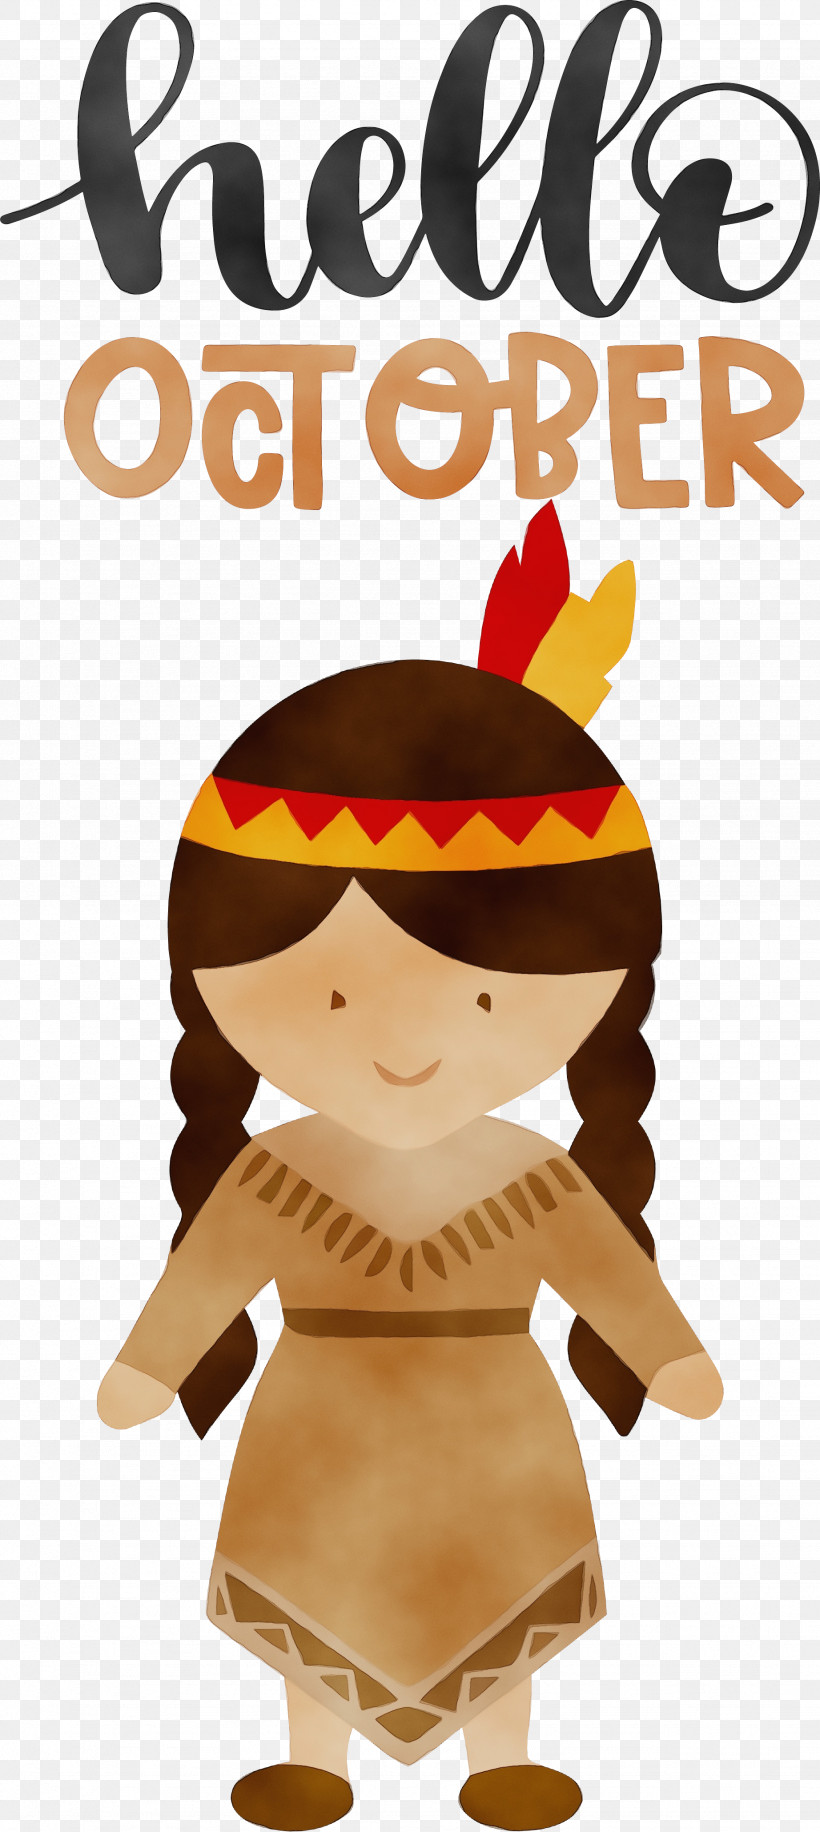 Indigenous Peoples American Indian Group Americas Gondi People Indian Americans, PNG, 1844x4120px, Hello October, American Indian Group, Americas, Autumn, Gondi People Download Free